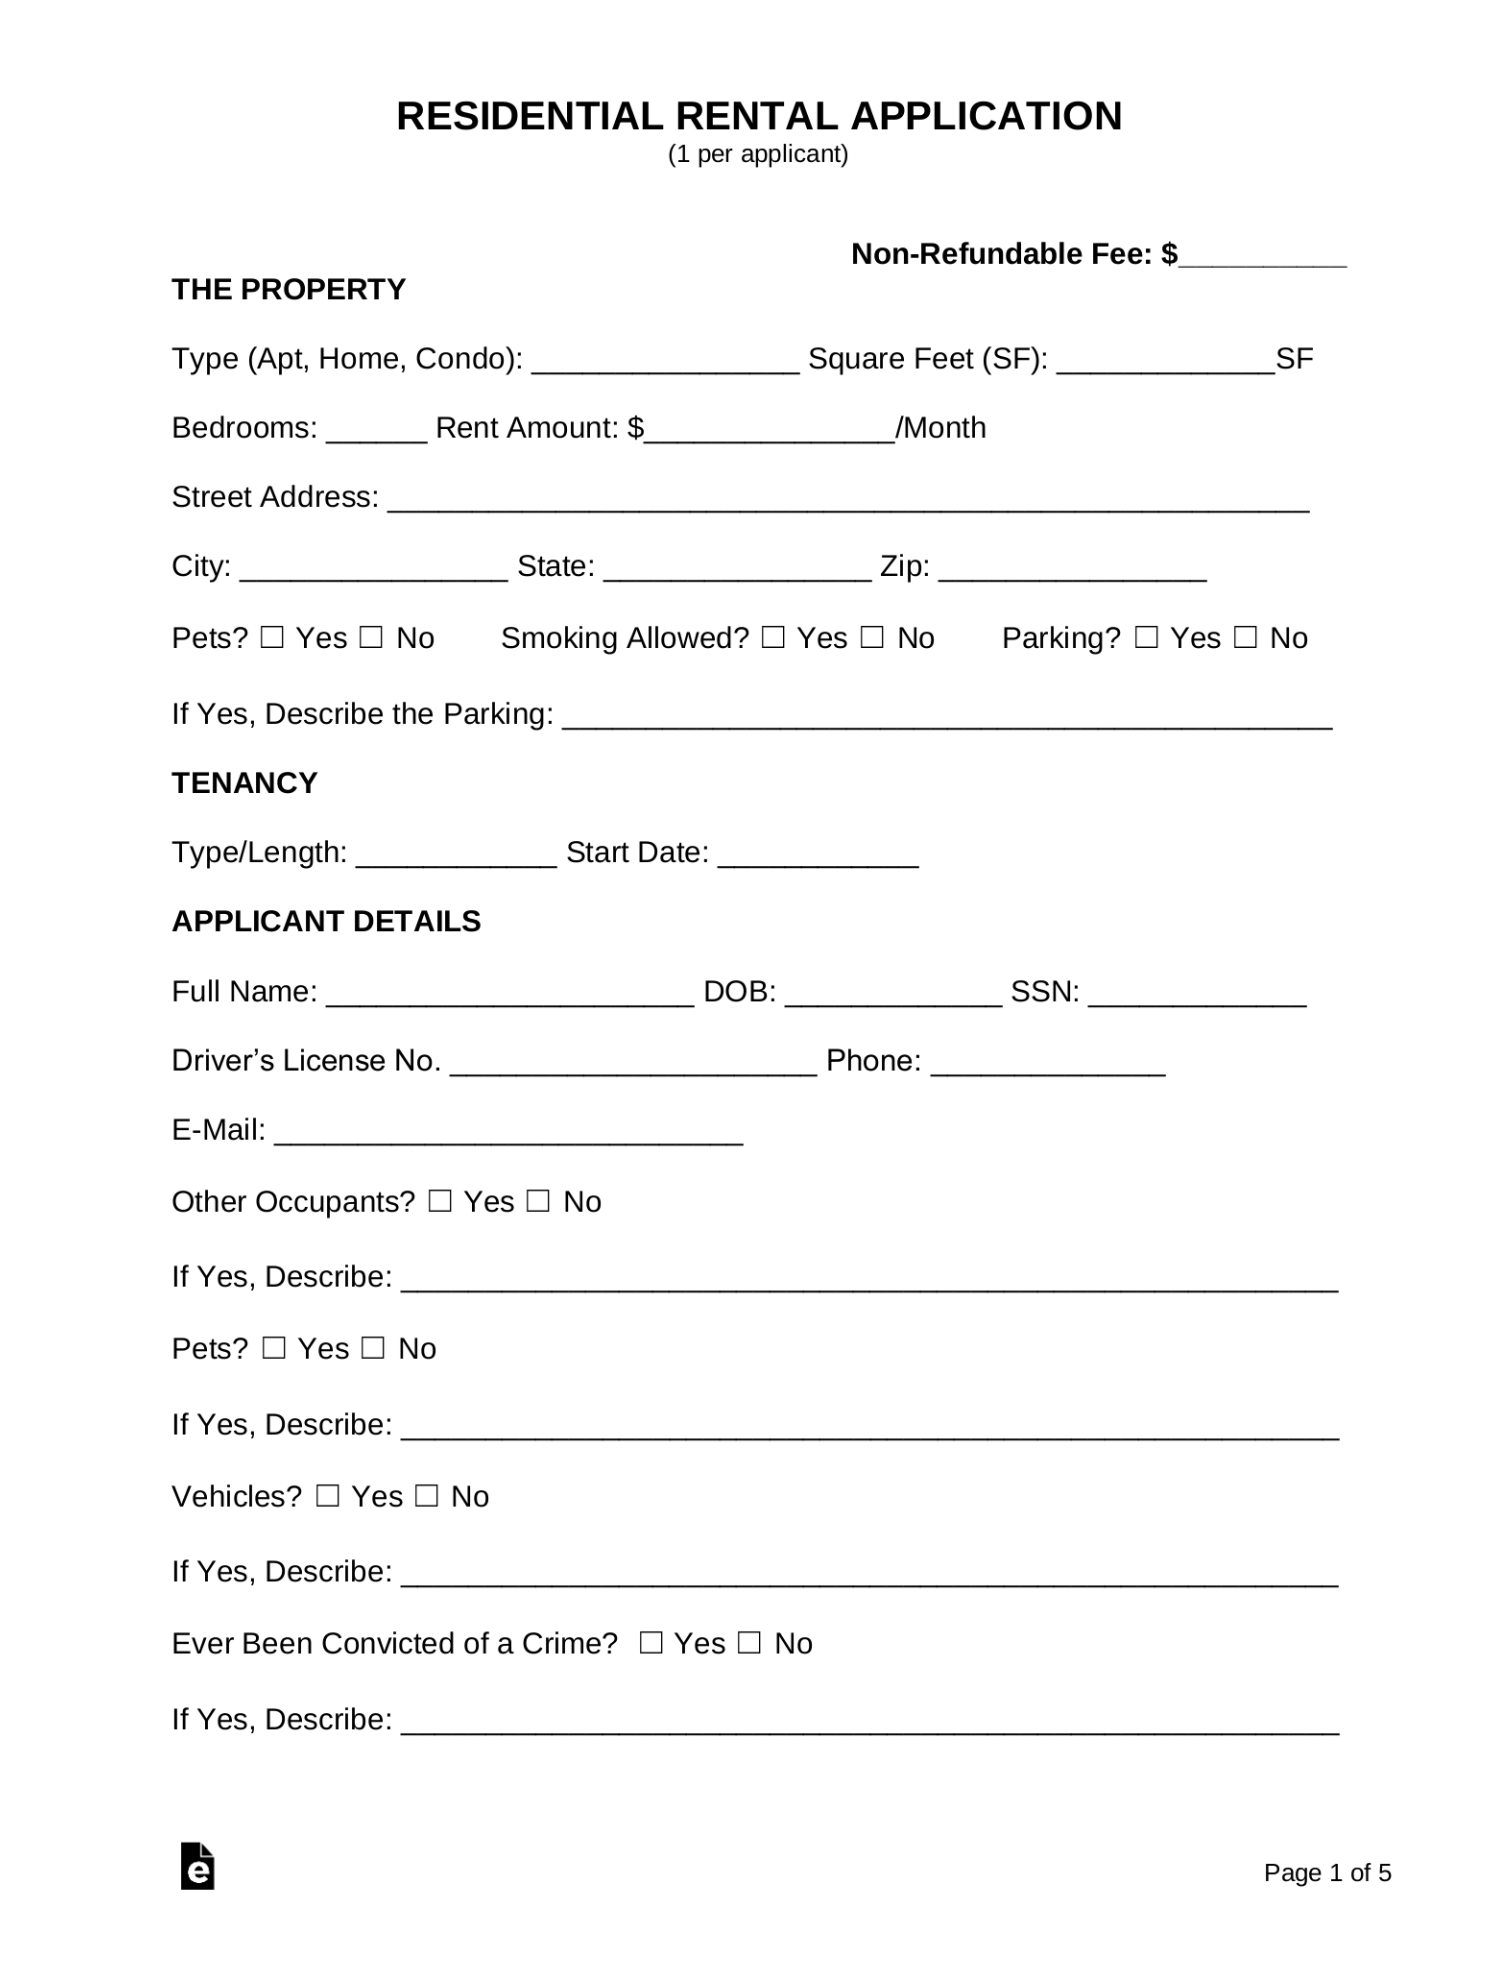 eForms Residential Application Form